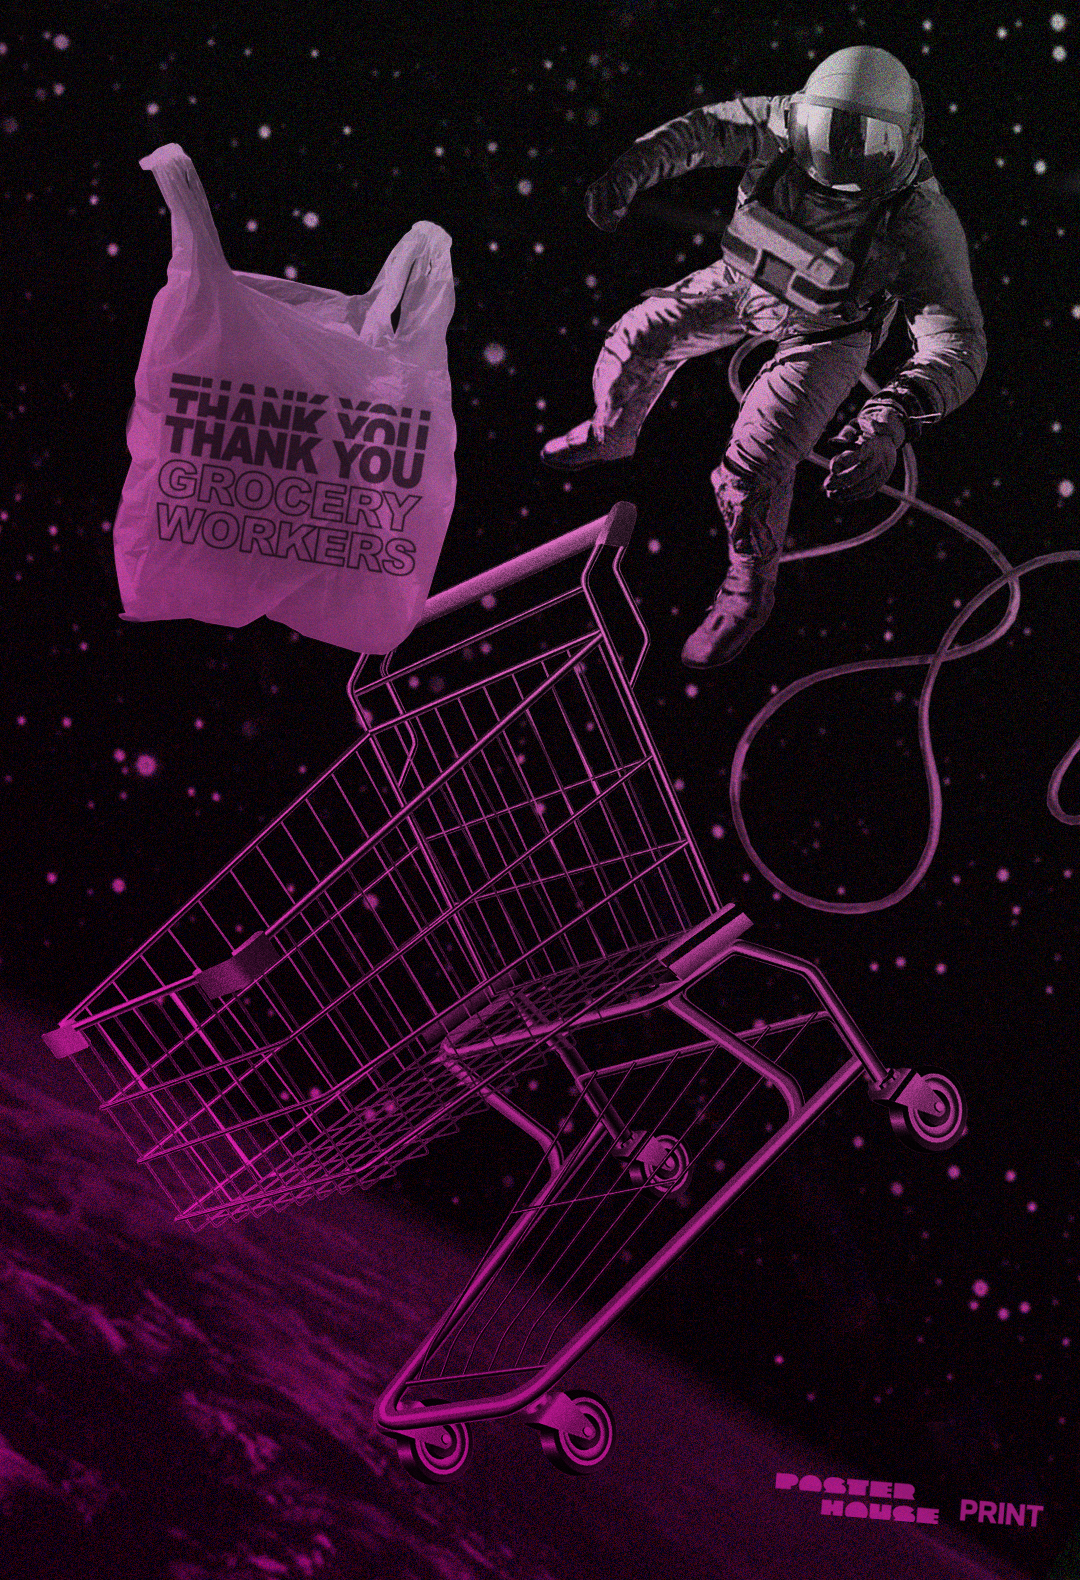 A photomontage poster of a shopping cart, shopping bag, and astronaut floating in space.